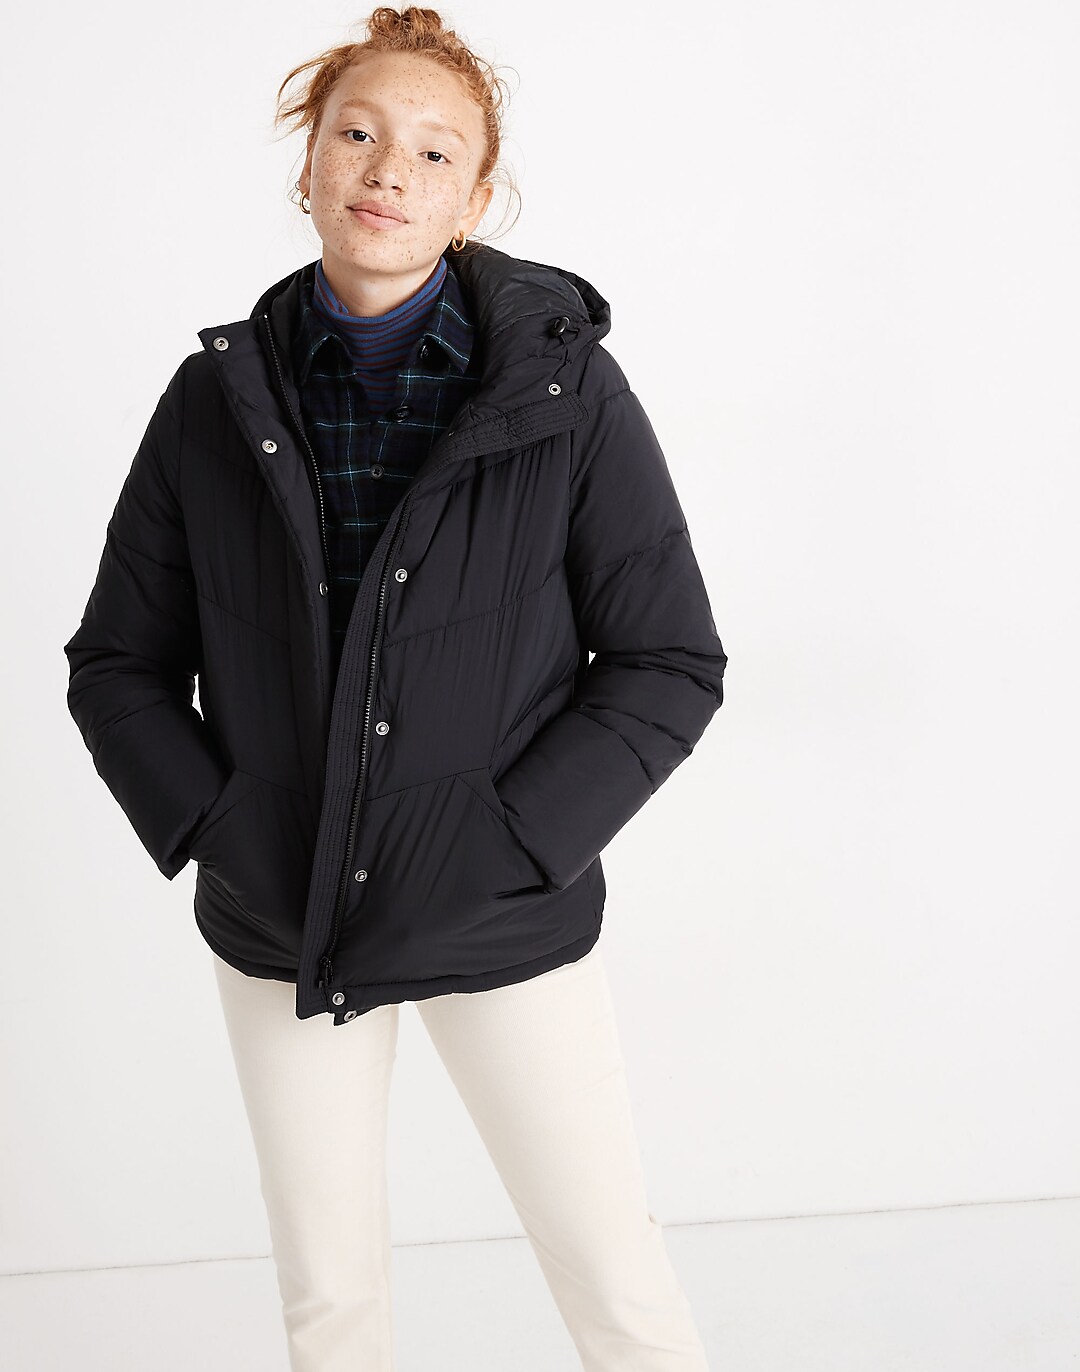 NWT Madewell by J.Crew Women's Quilted Puffer Parka ski jacket coat M  AE332